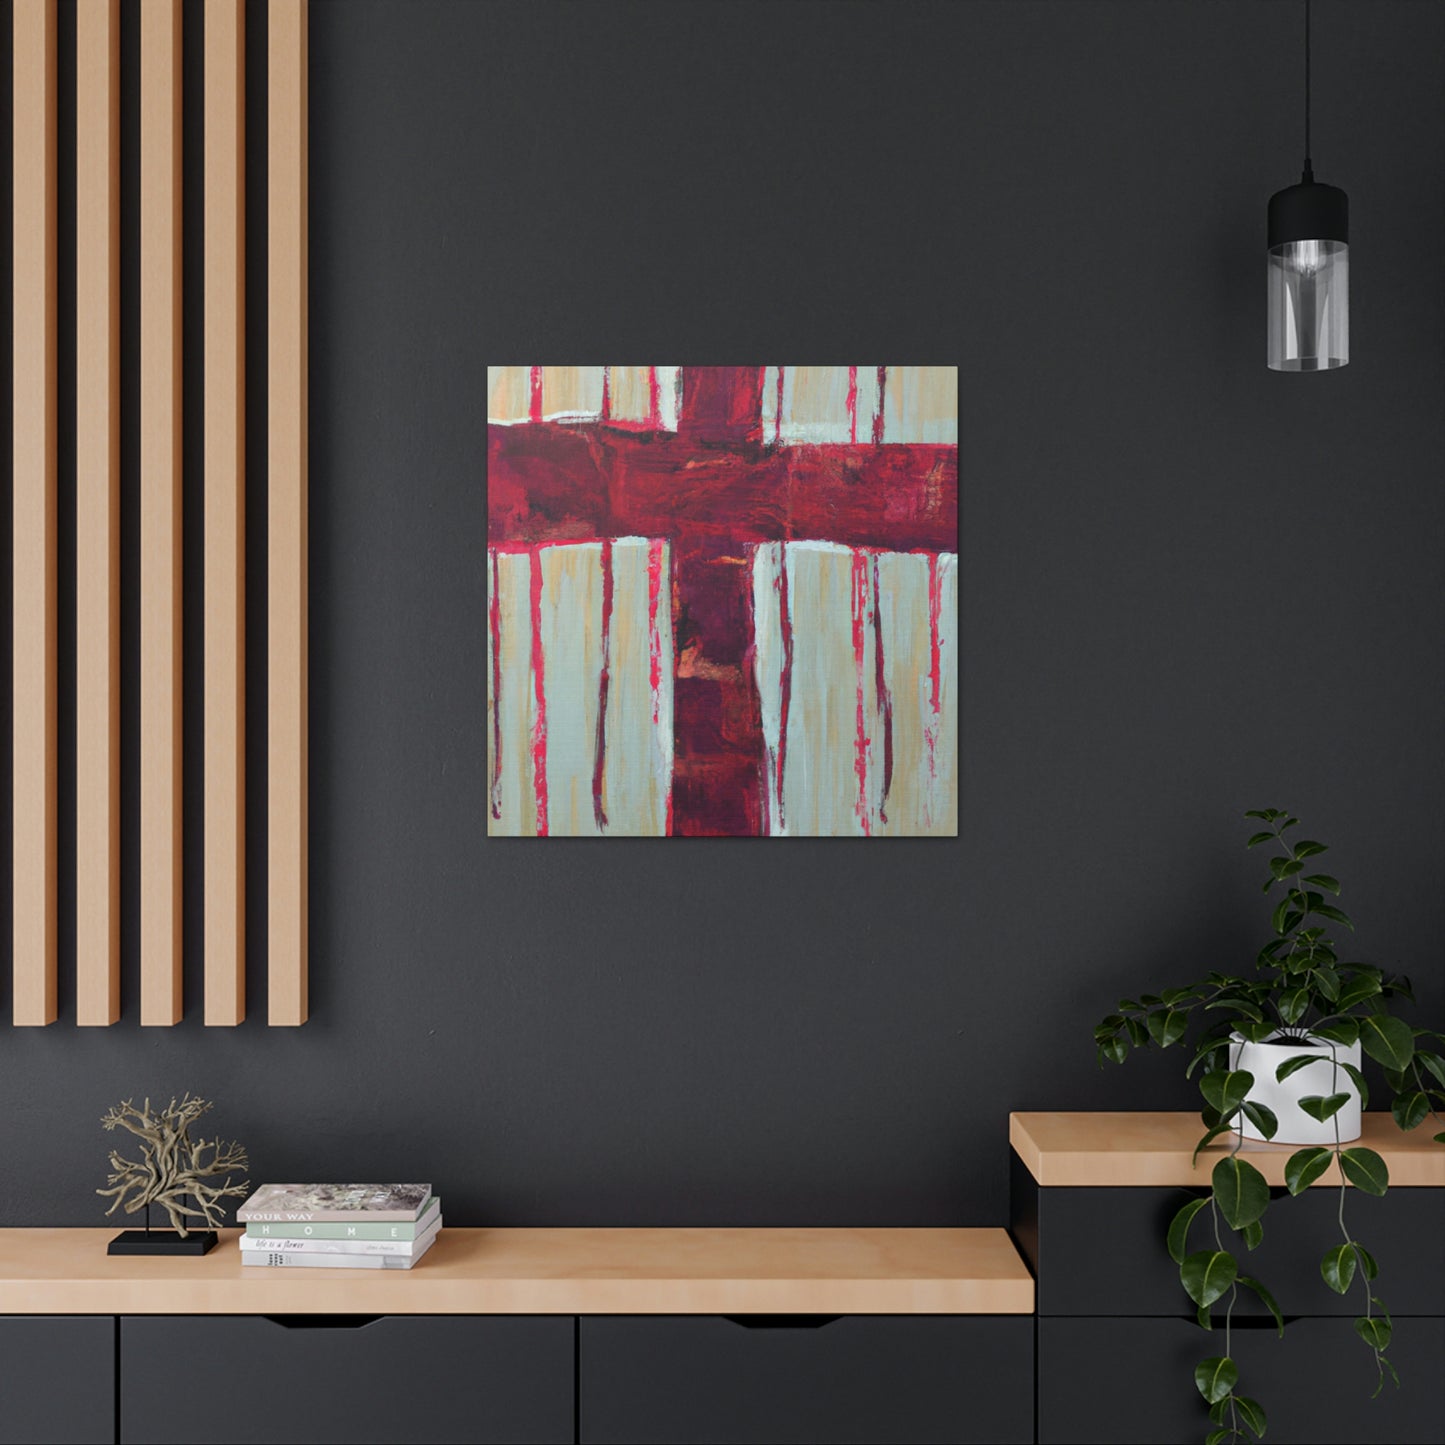 Psalm 46:10
"Be still, and know that I am God" - Canvas Wall Art